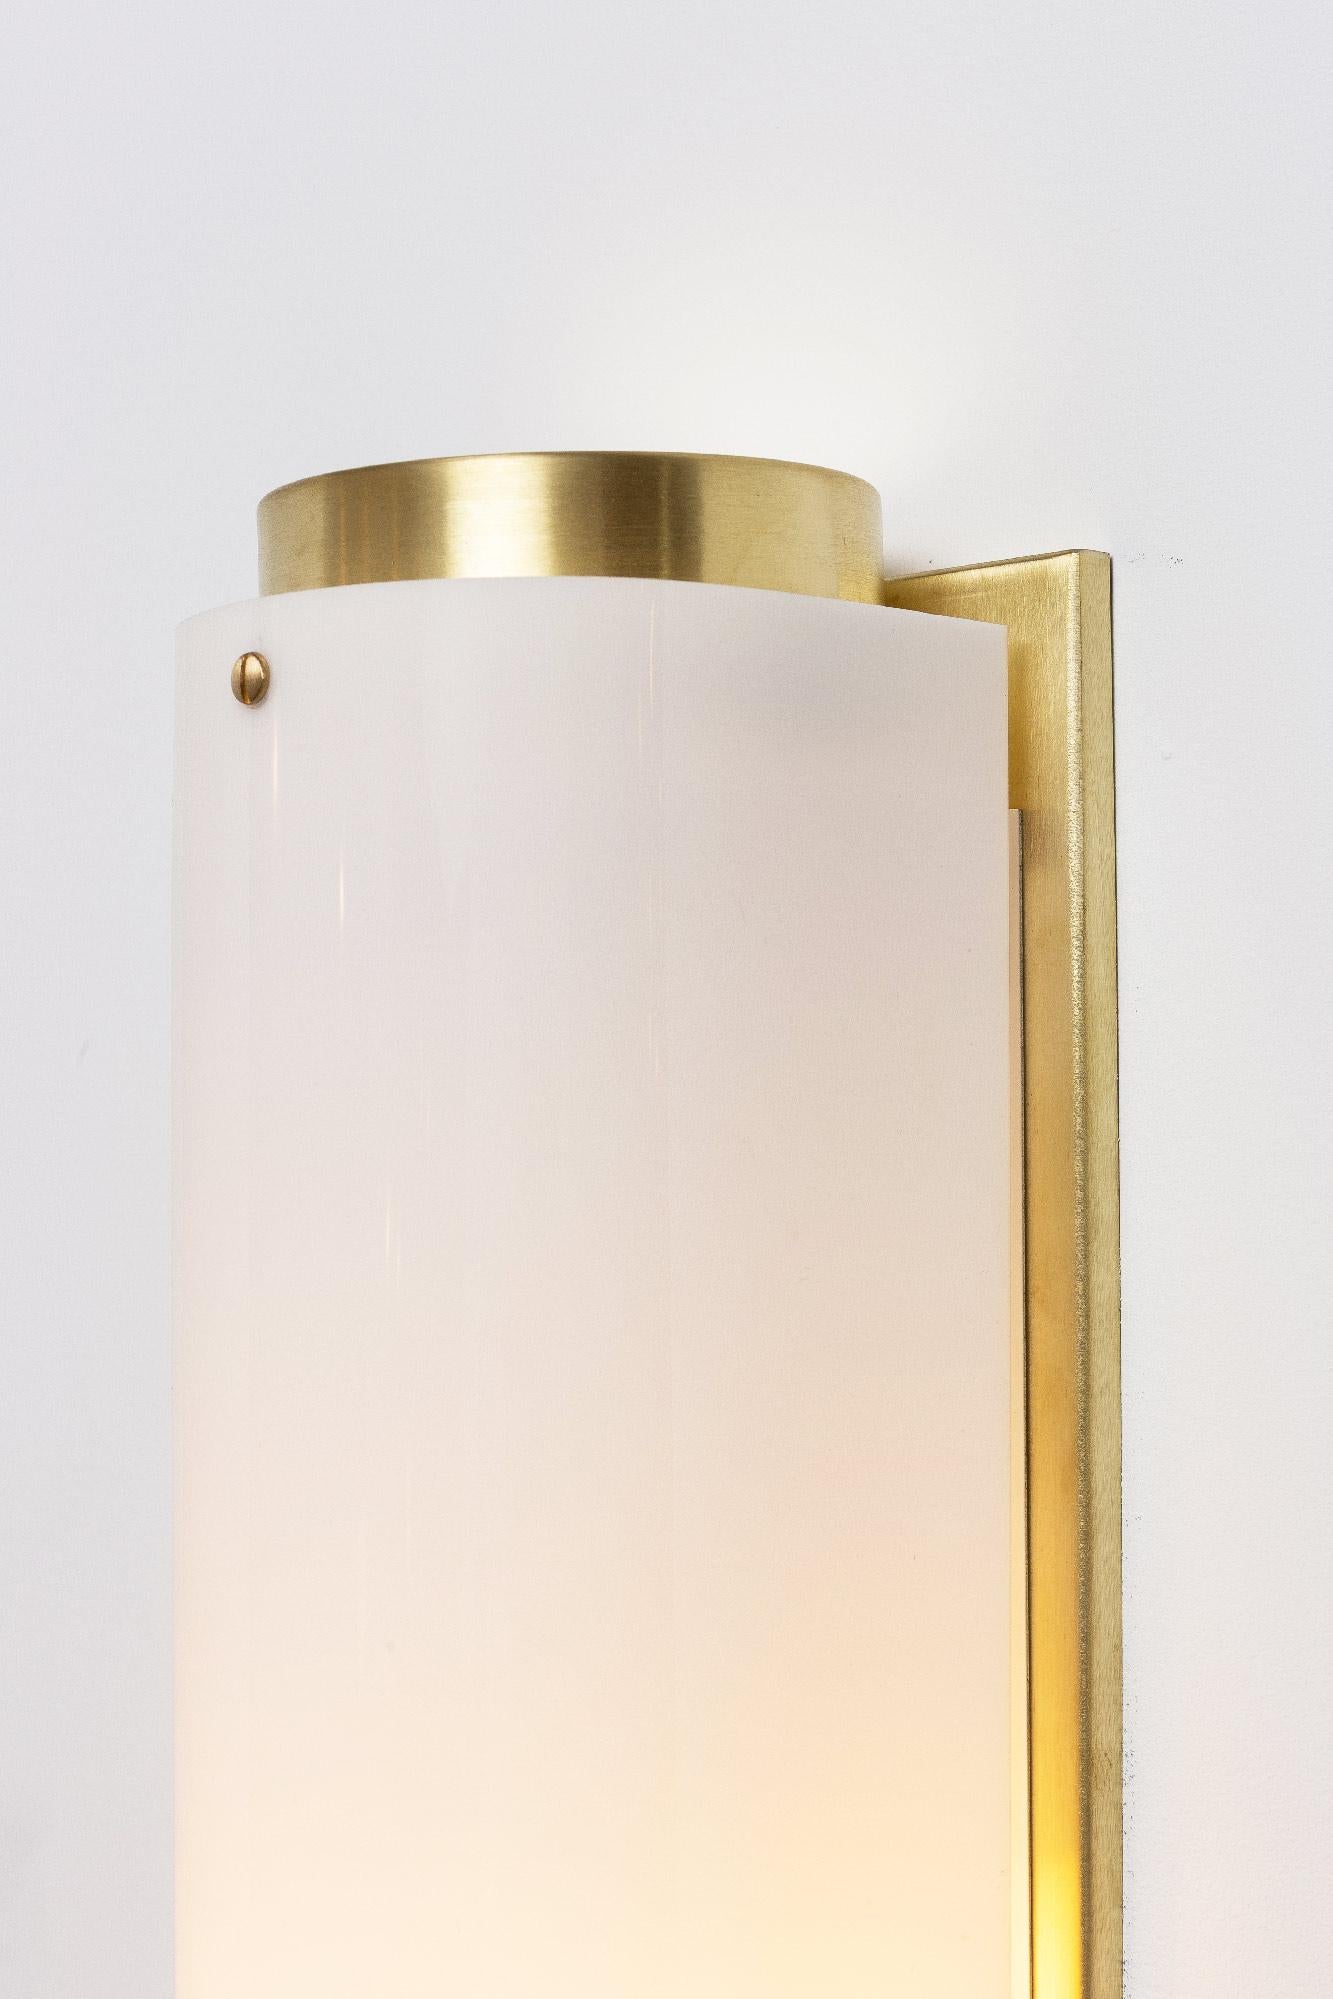 The arc sconce is made of a solid unfinished brass and backplate with a white Lucite shade and brass screws.

Small in inventory now: W 4.5in (13.5cm) x D 3.5in (13.5cm) x H 12in (30.5cm)
Brass

(2) 60W medium base socket
Satin brass and white